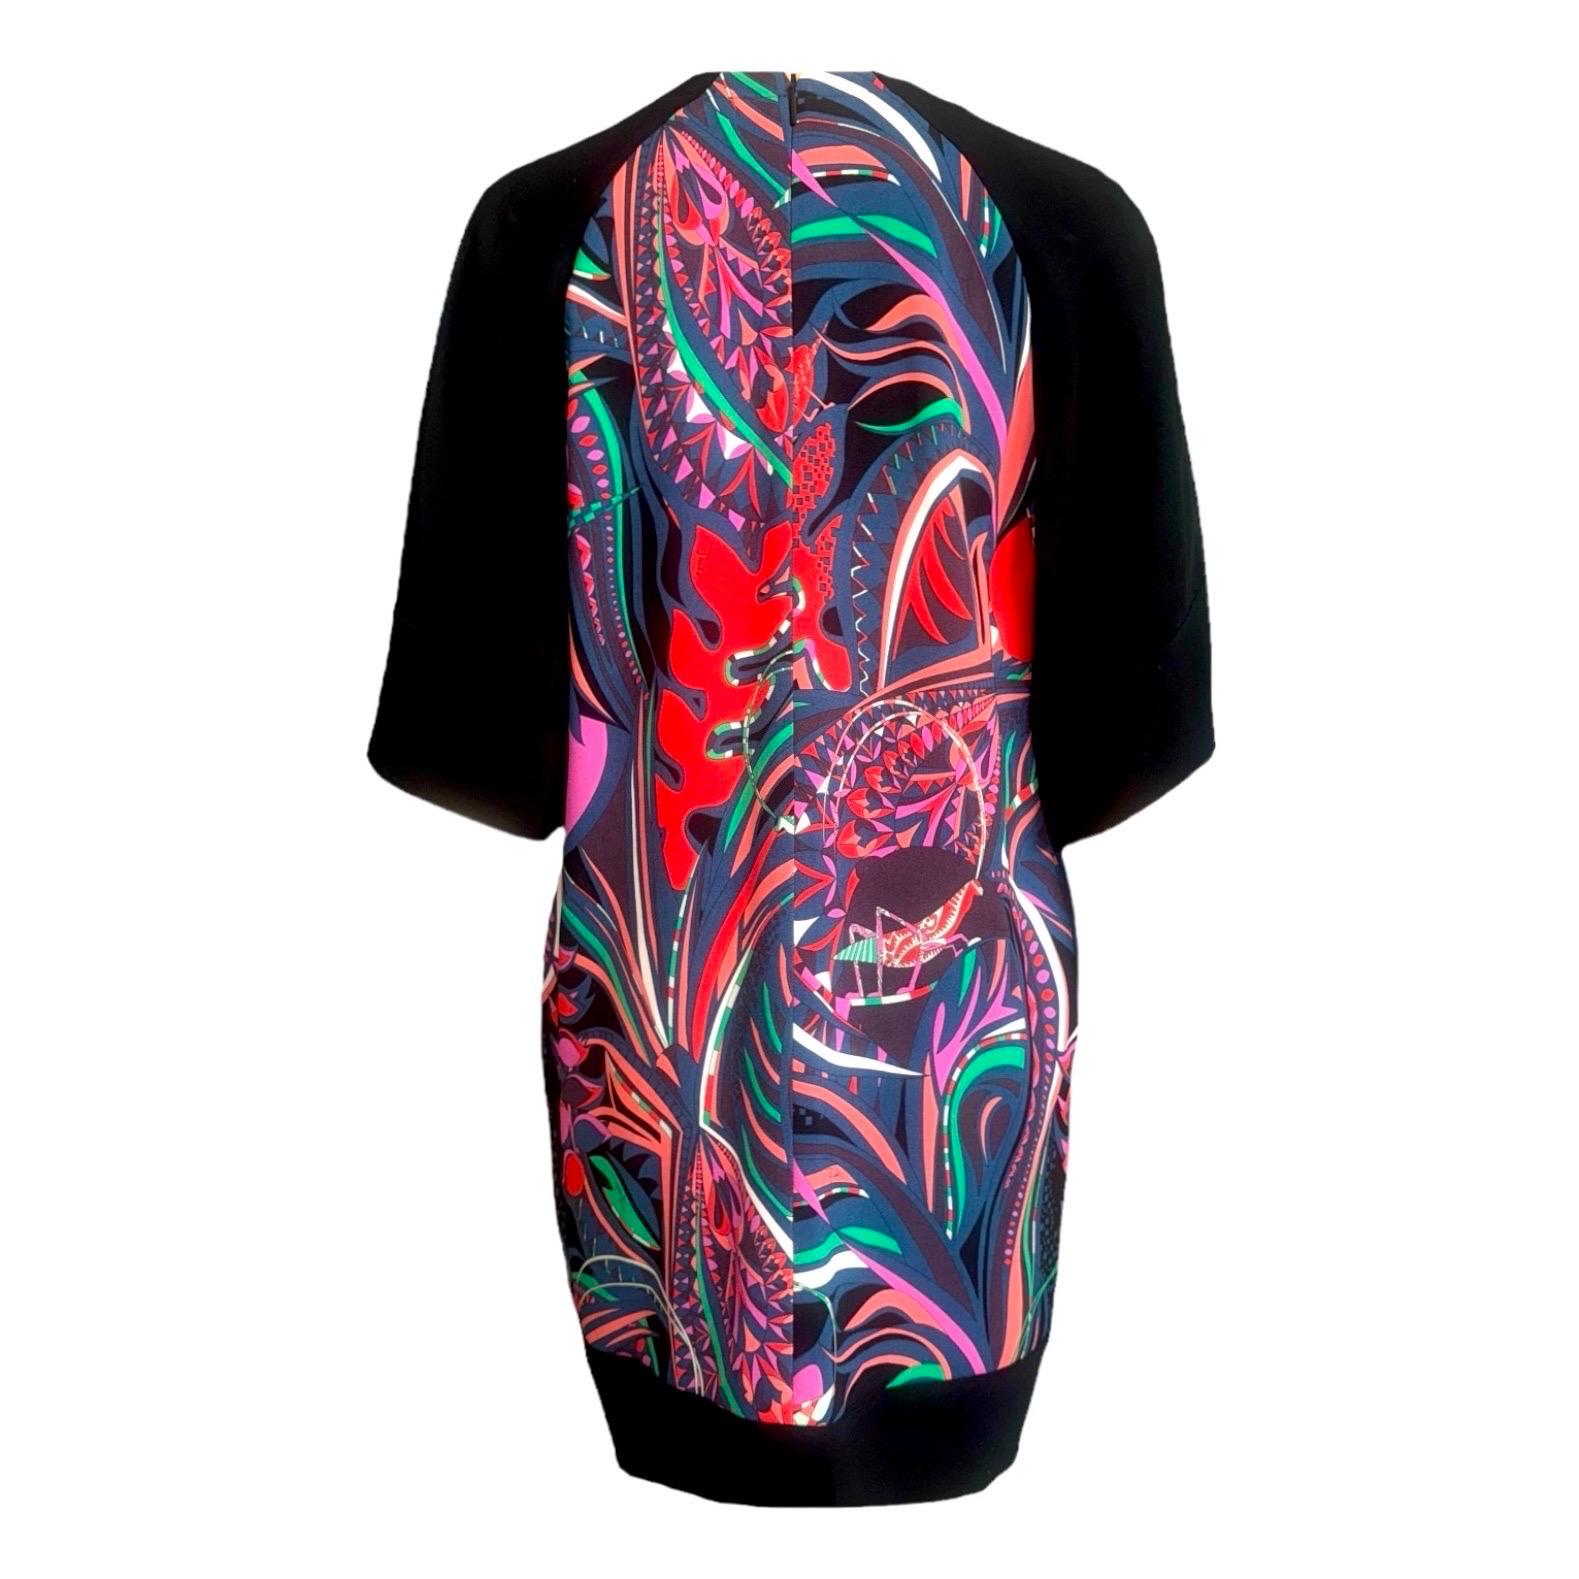 Beautiful EMILIO PUCCI dress
Signature piece with the timeless EMILIO PUCCI print in stunning colors
Made of finest soft fabric
Lined
